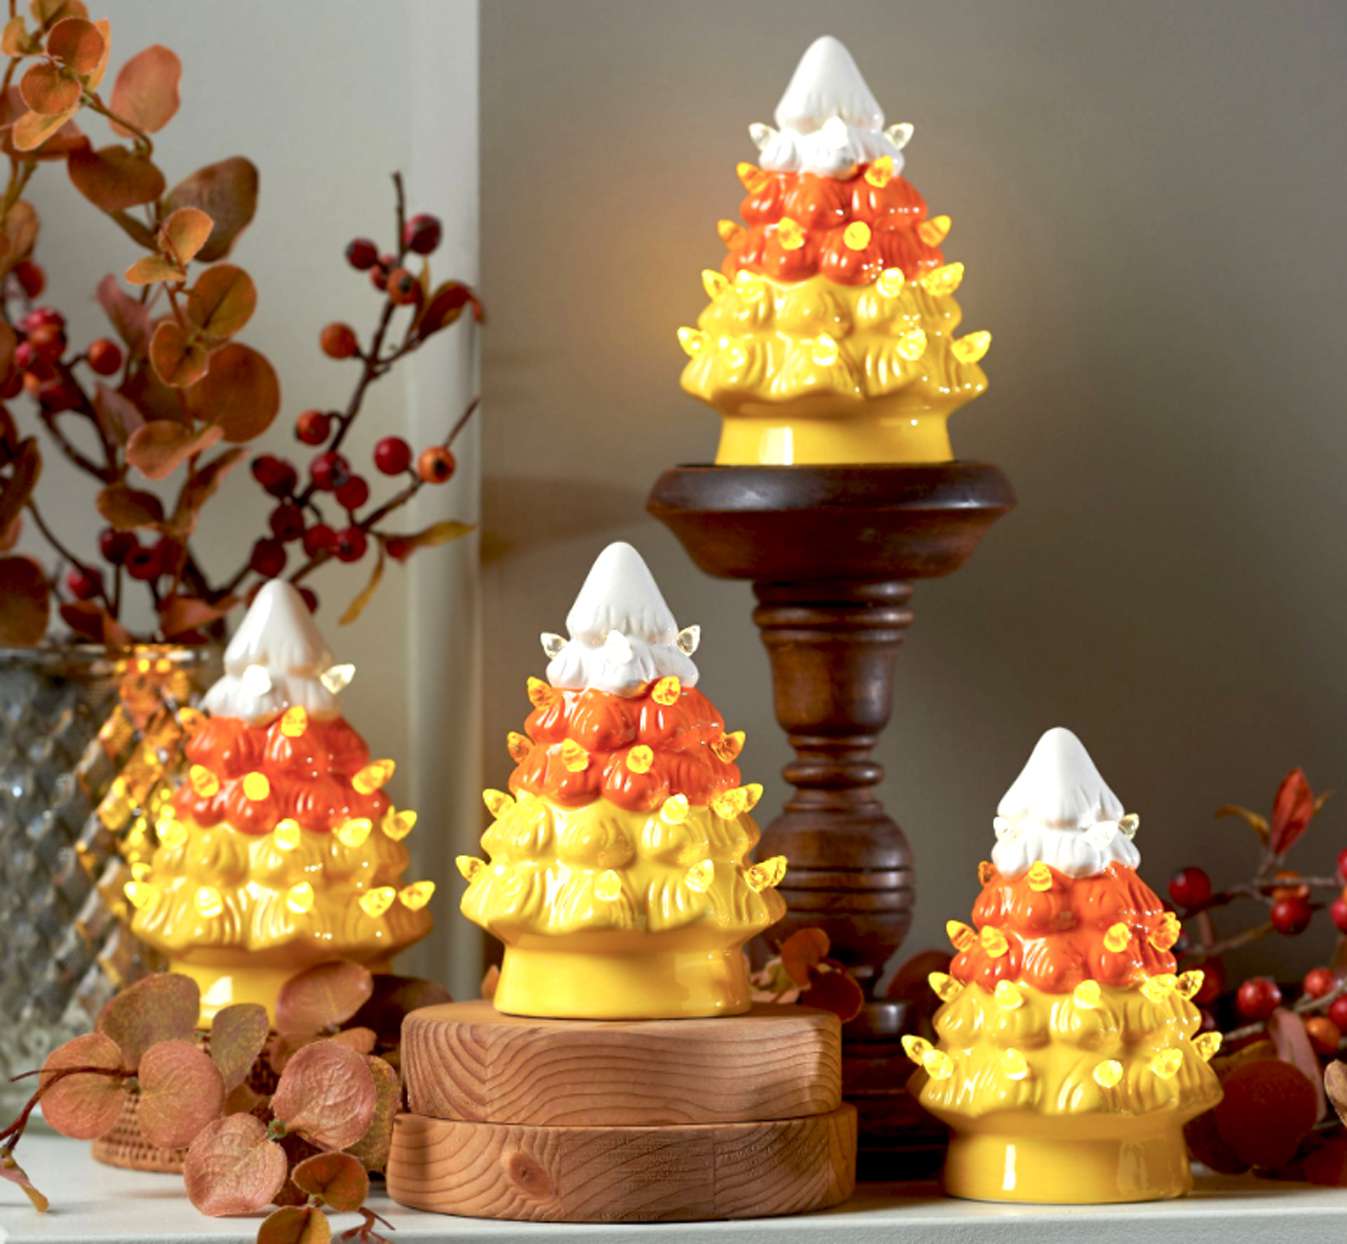 ceramic trees that resemble candy corn